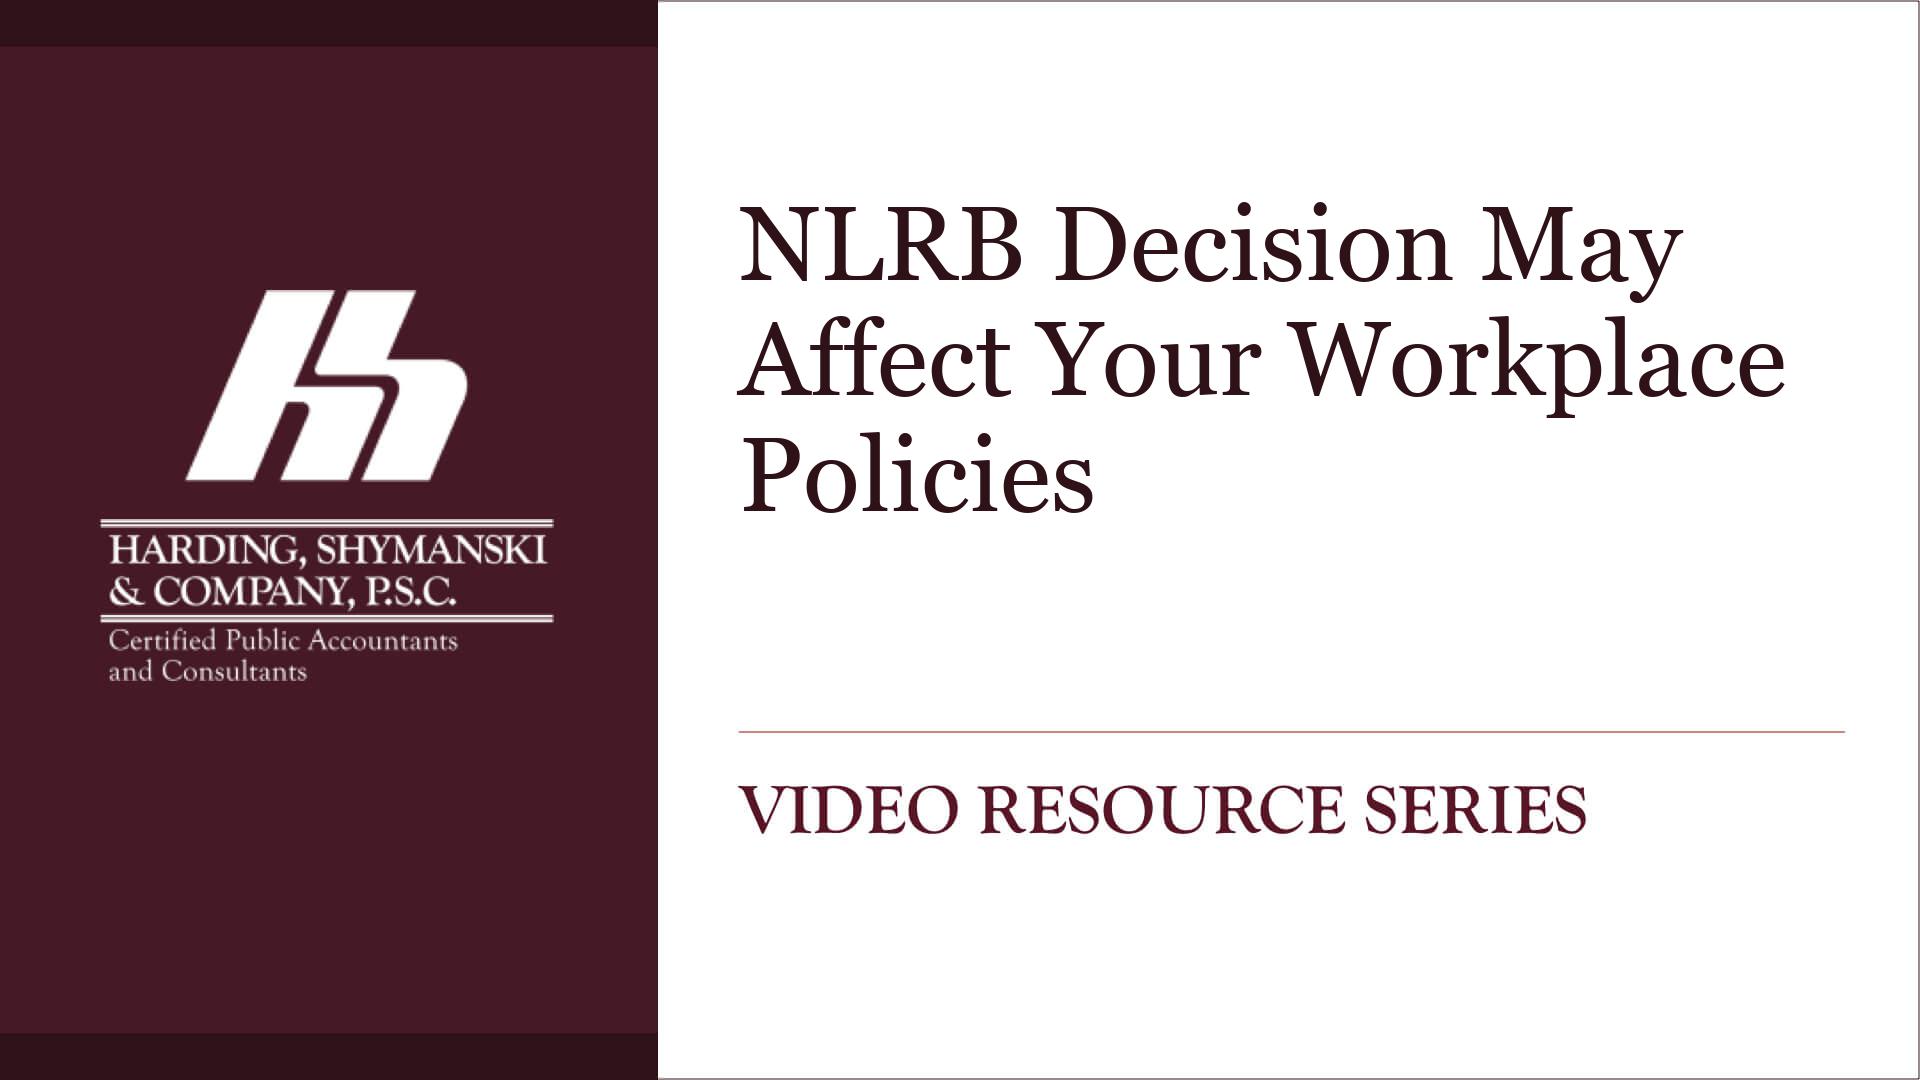 NLRB Decision May Affect Your Workplace Policies